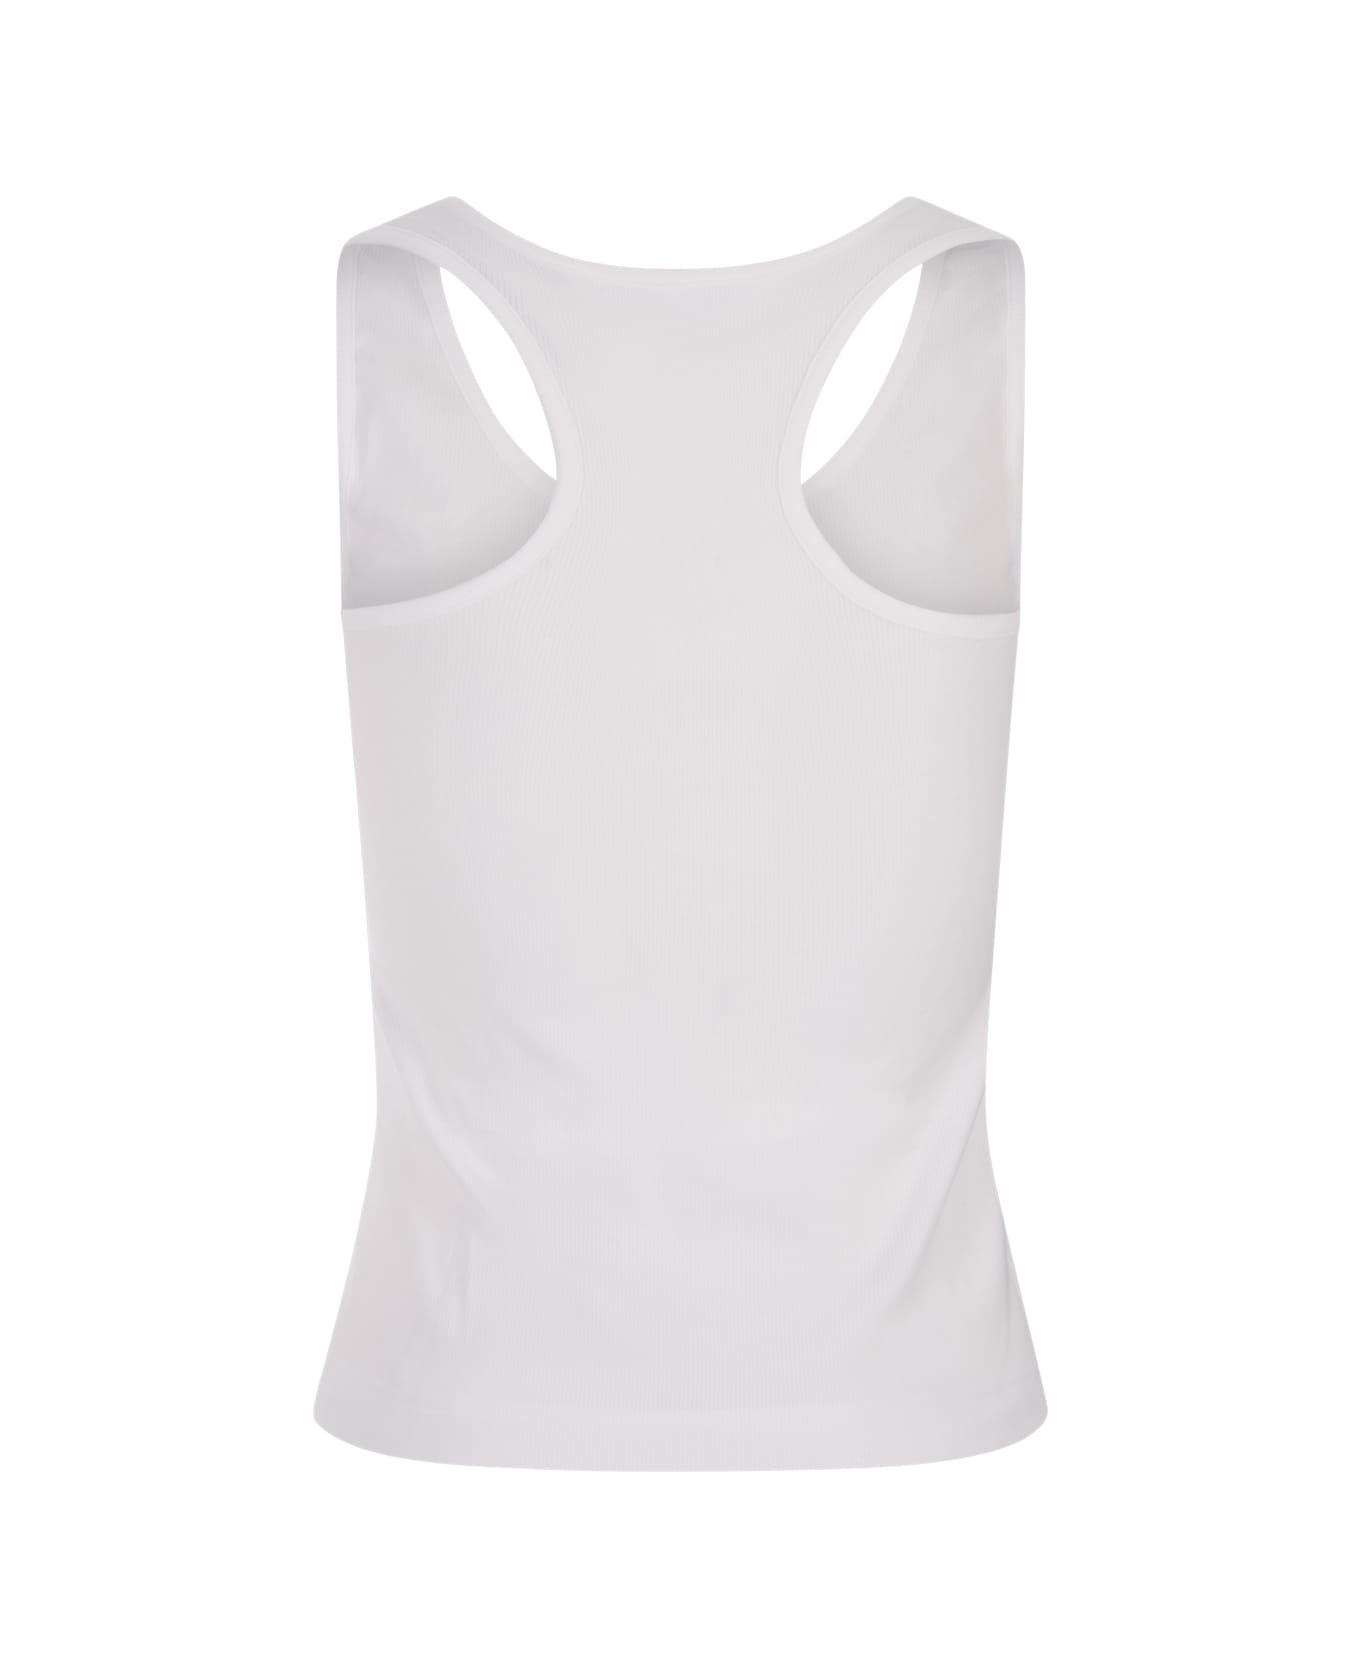 Palm Angels White Embroidered Tank Top - White